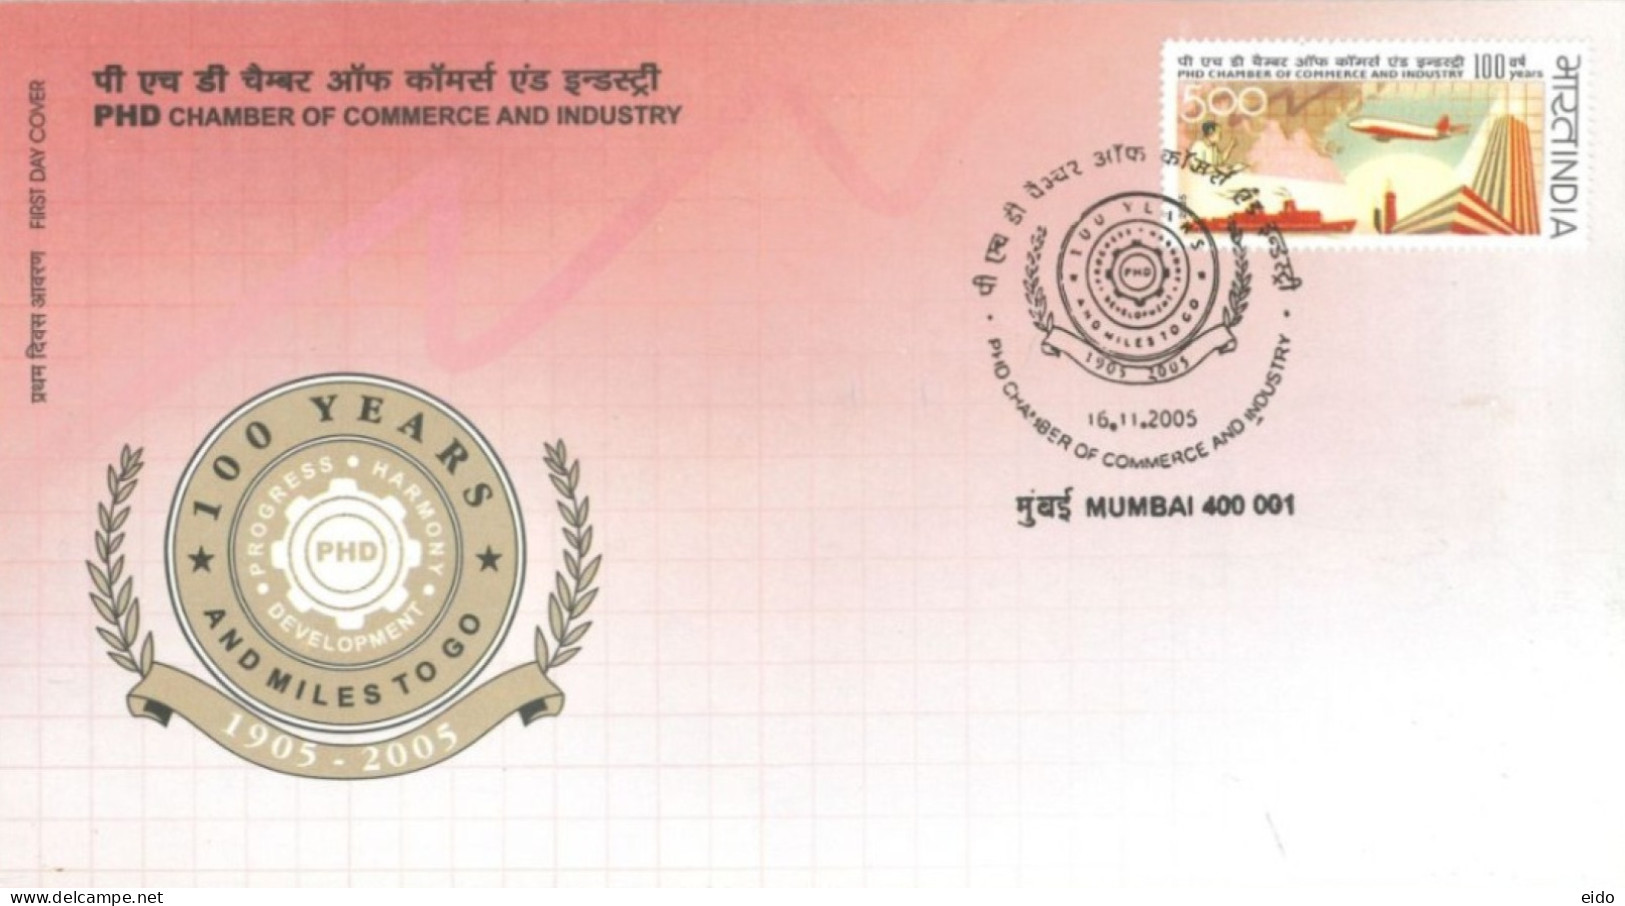 INDIA - 2005 - FDC STAMP OF PHD CHAMBER OF COMMERCE AND INDUSTRY. - Brieven En Documenten